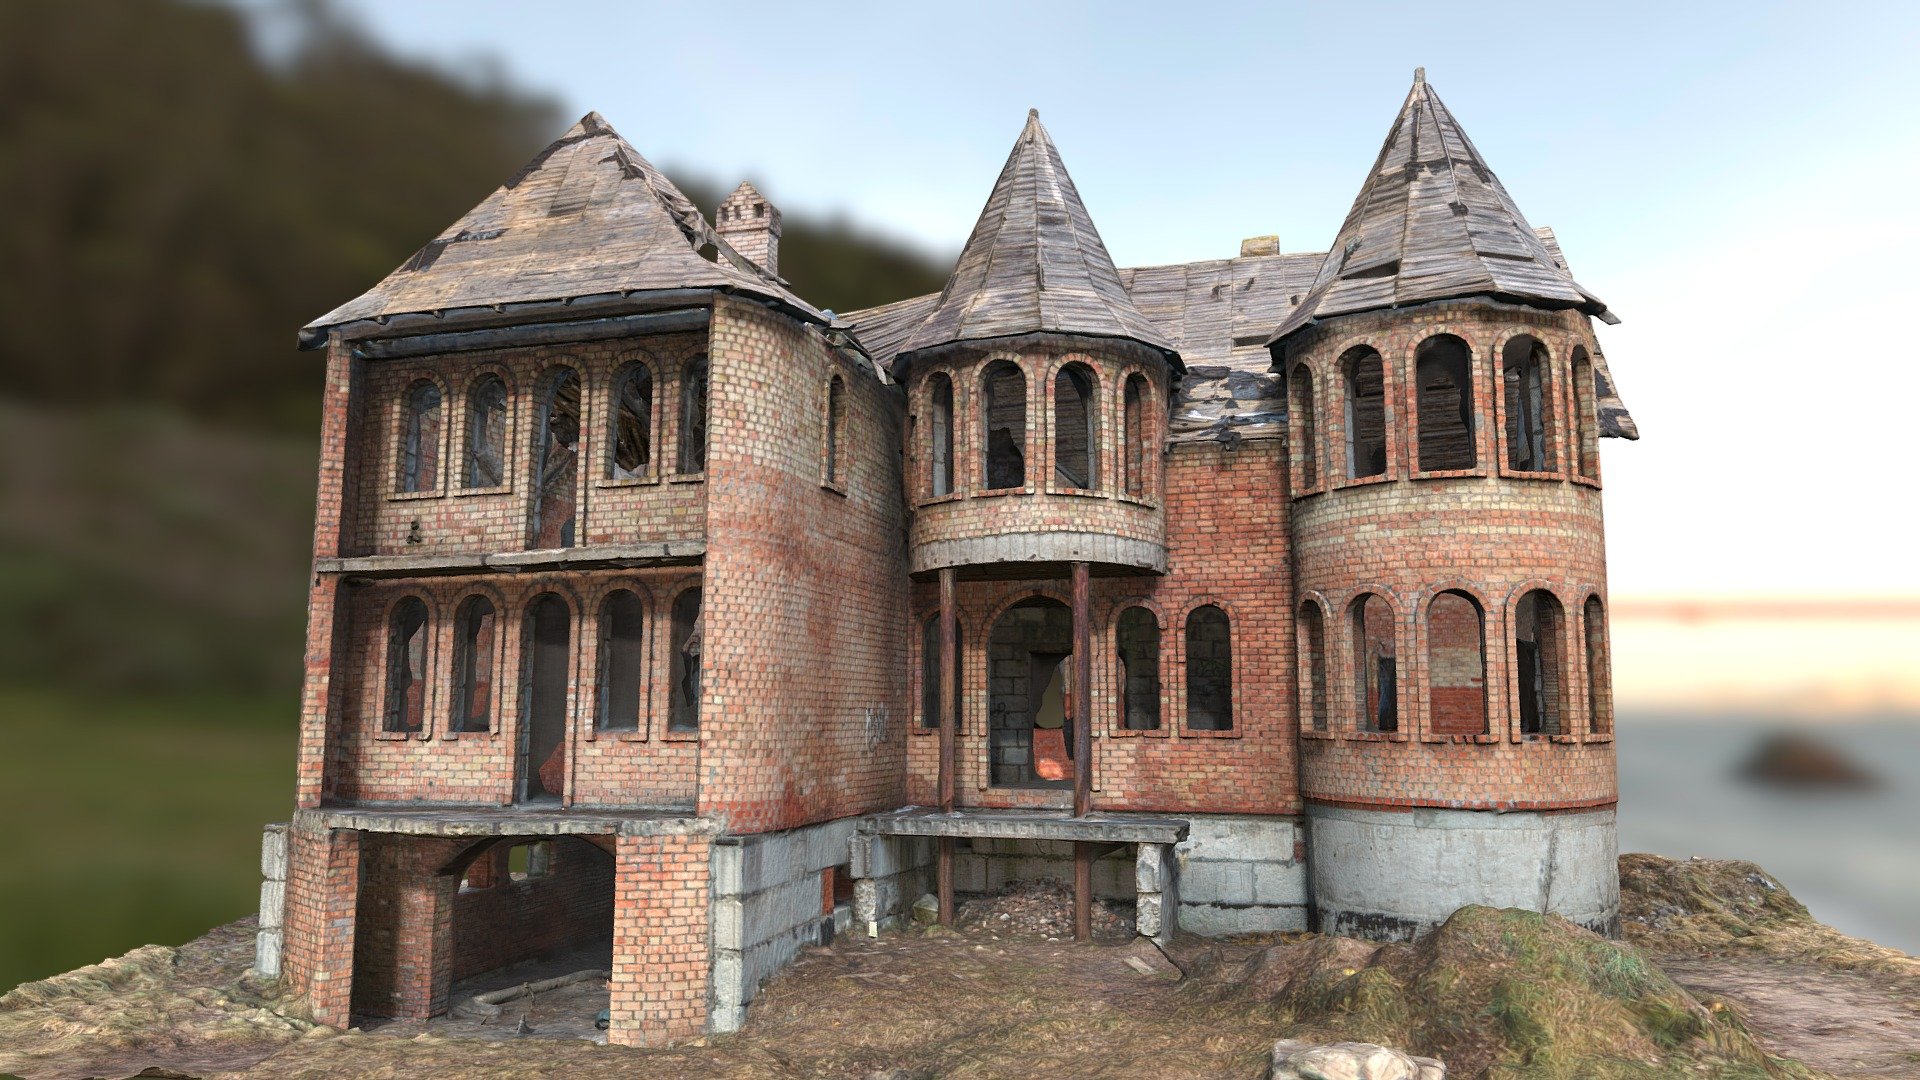 3D scan of an old derelict building with red bricks, many windows. Kinda looks like a castle.
With normal map 3d model